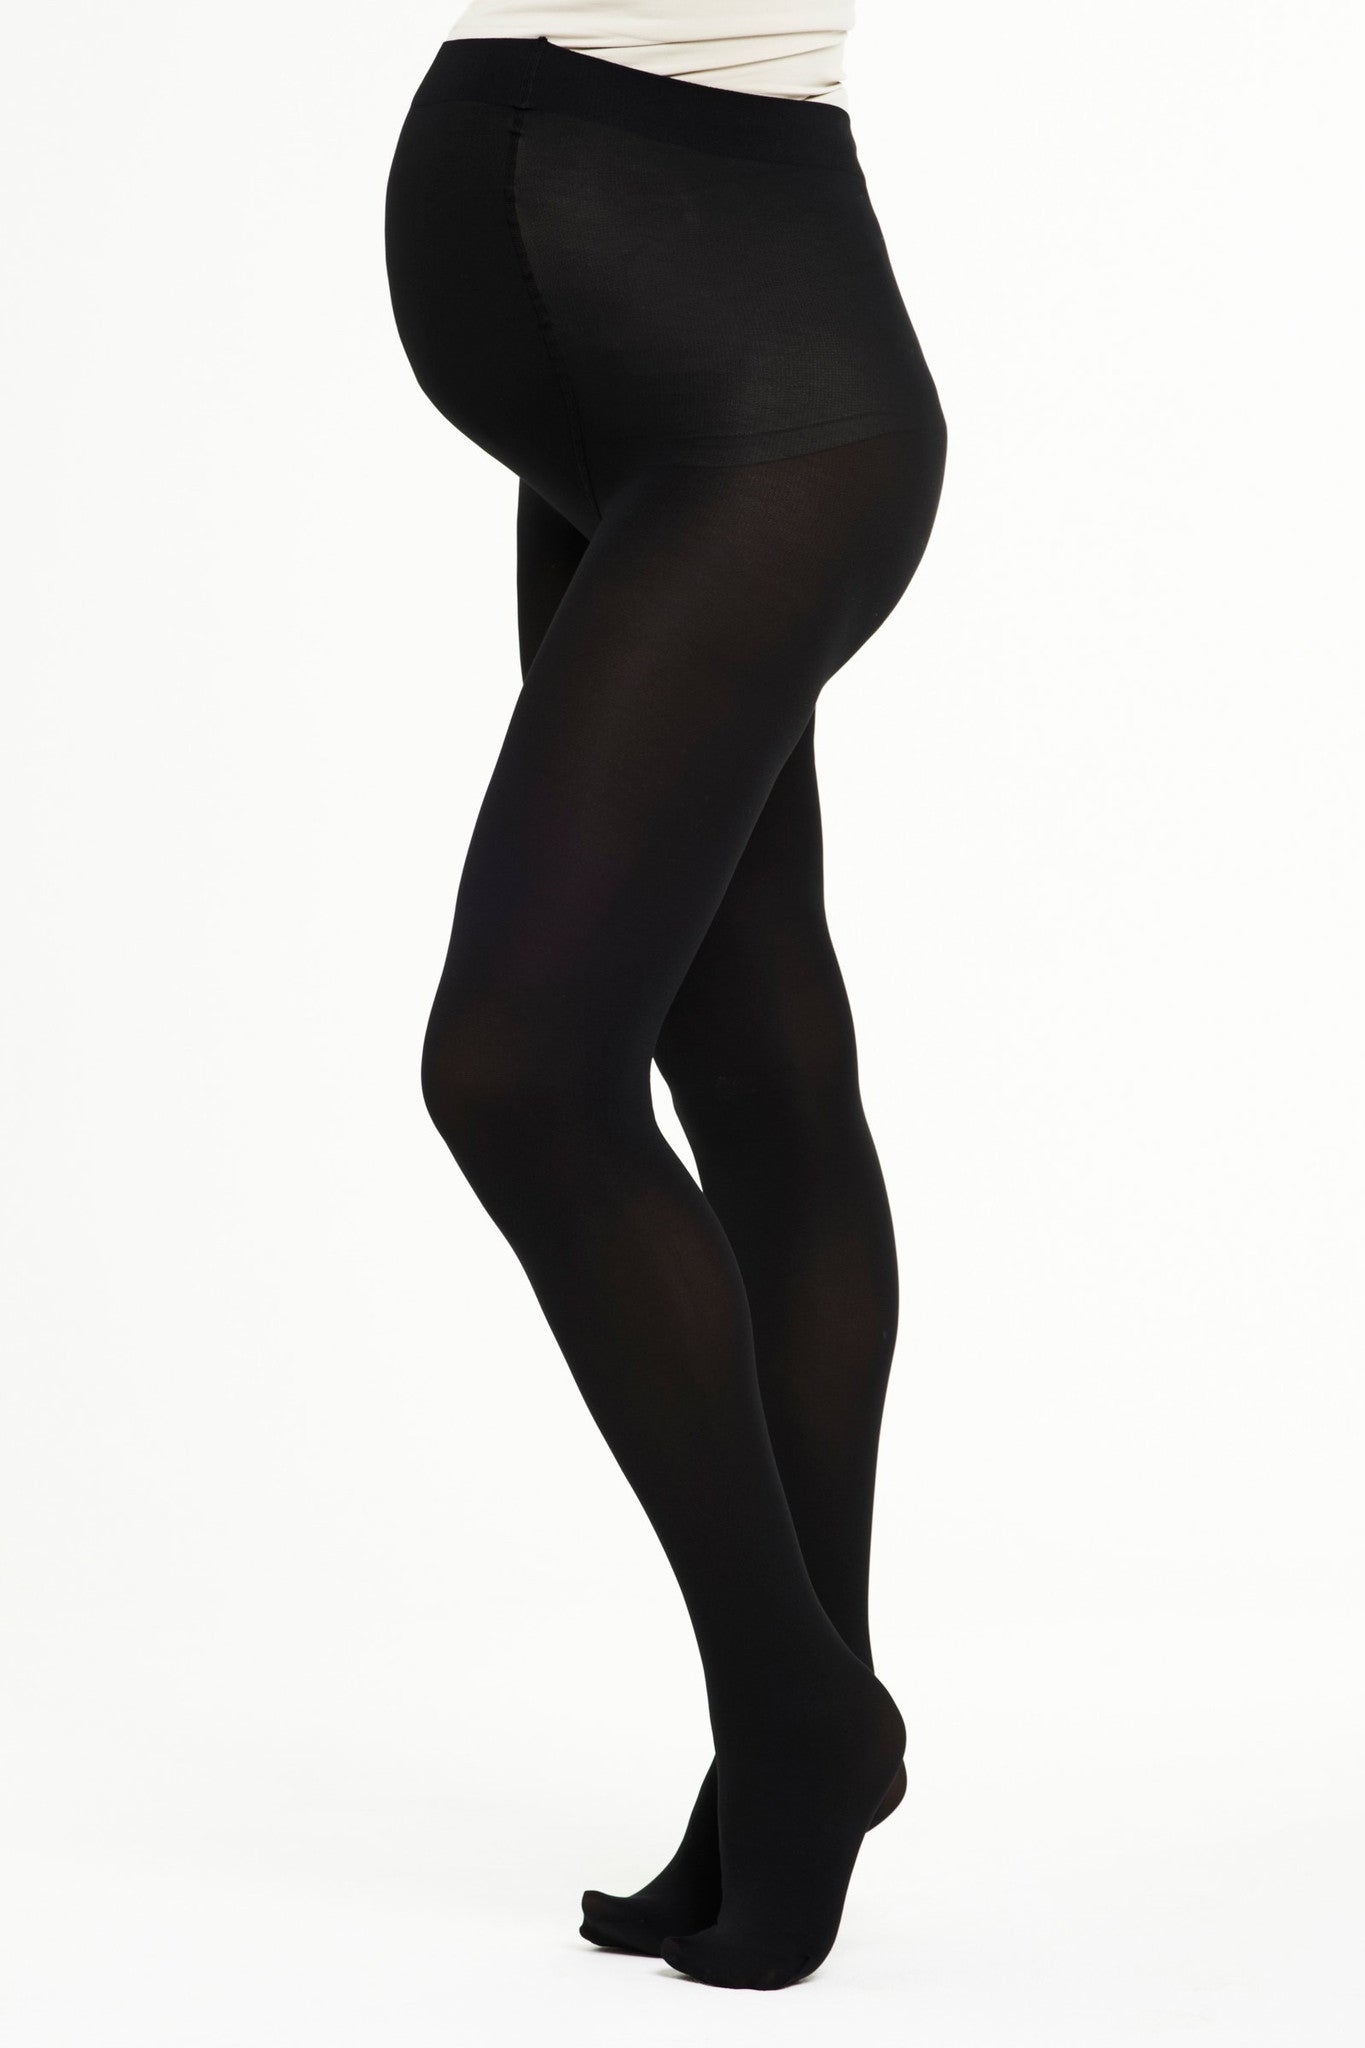 NEW MOM MATERNITY STOCKINGS at Rs 700/piece